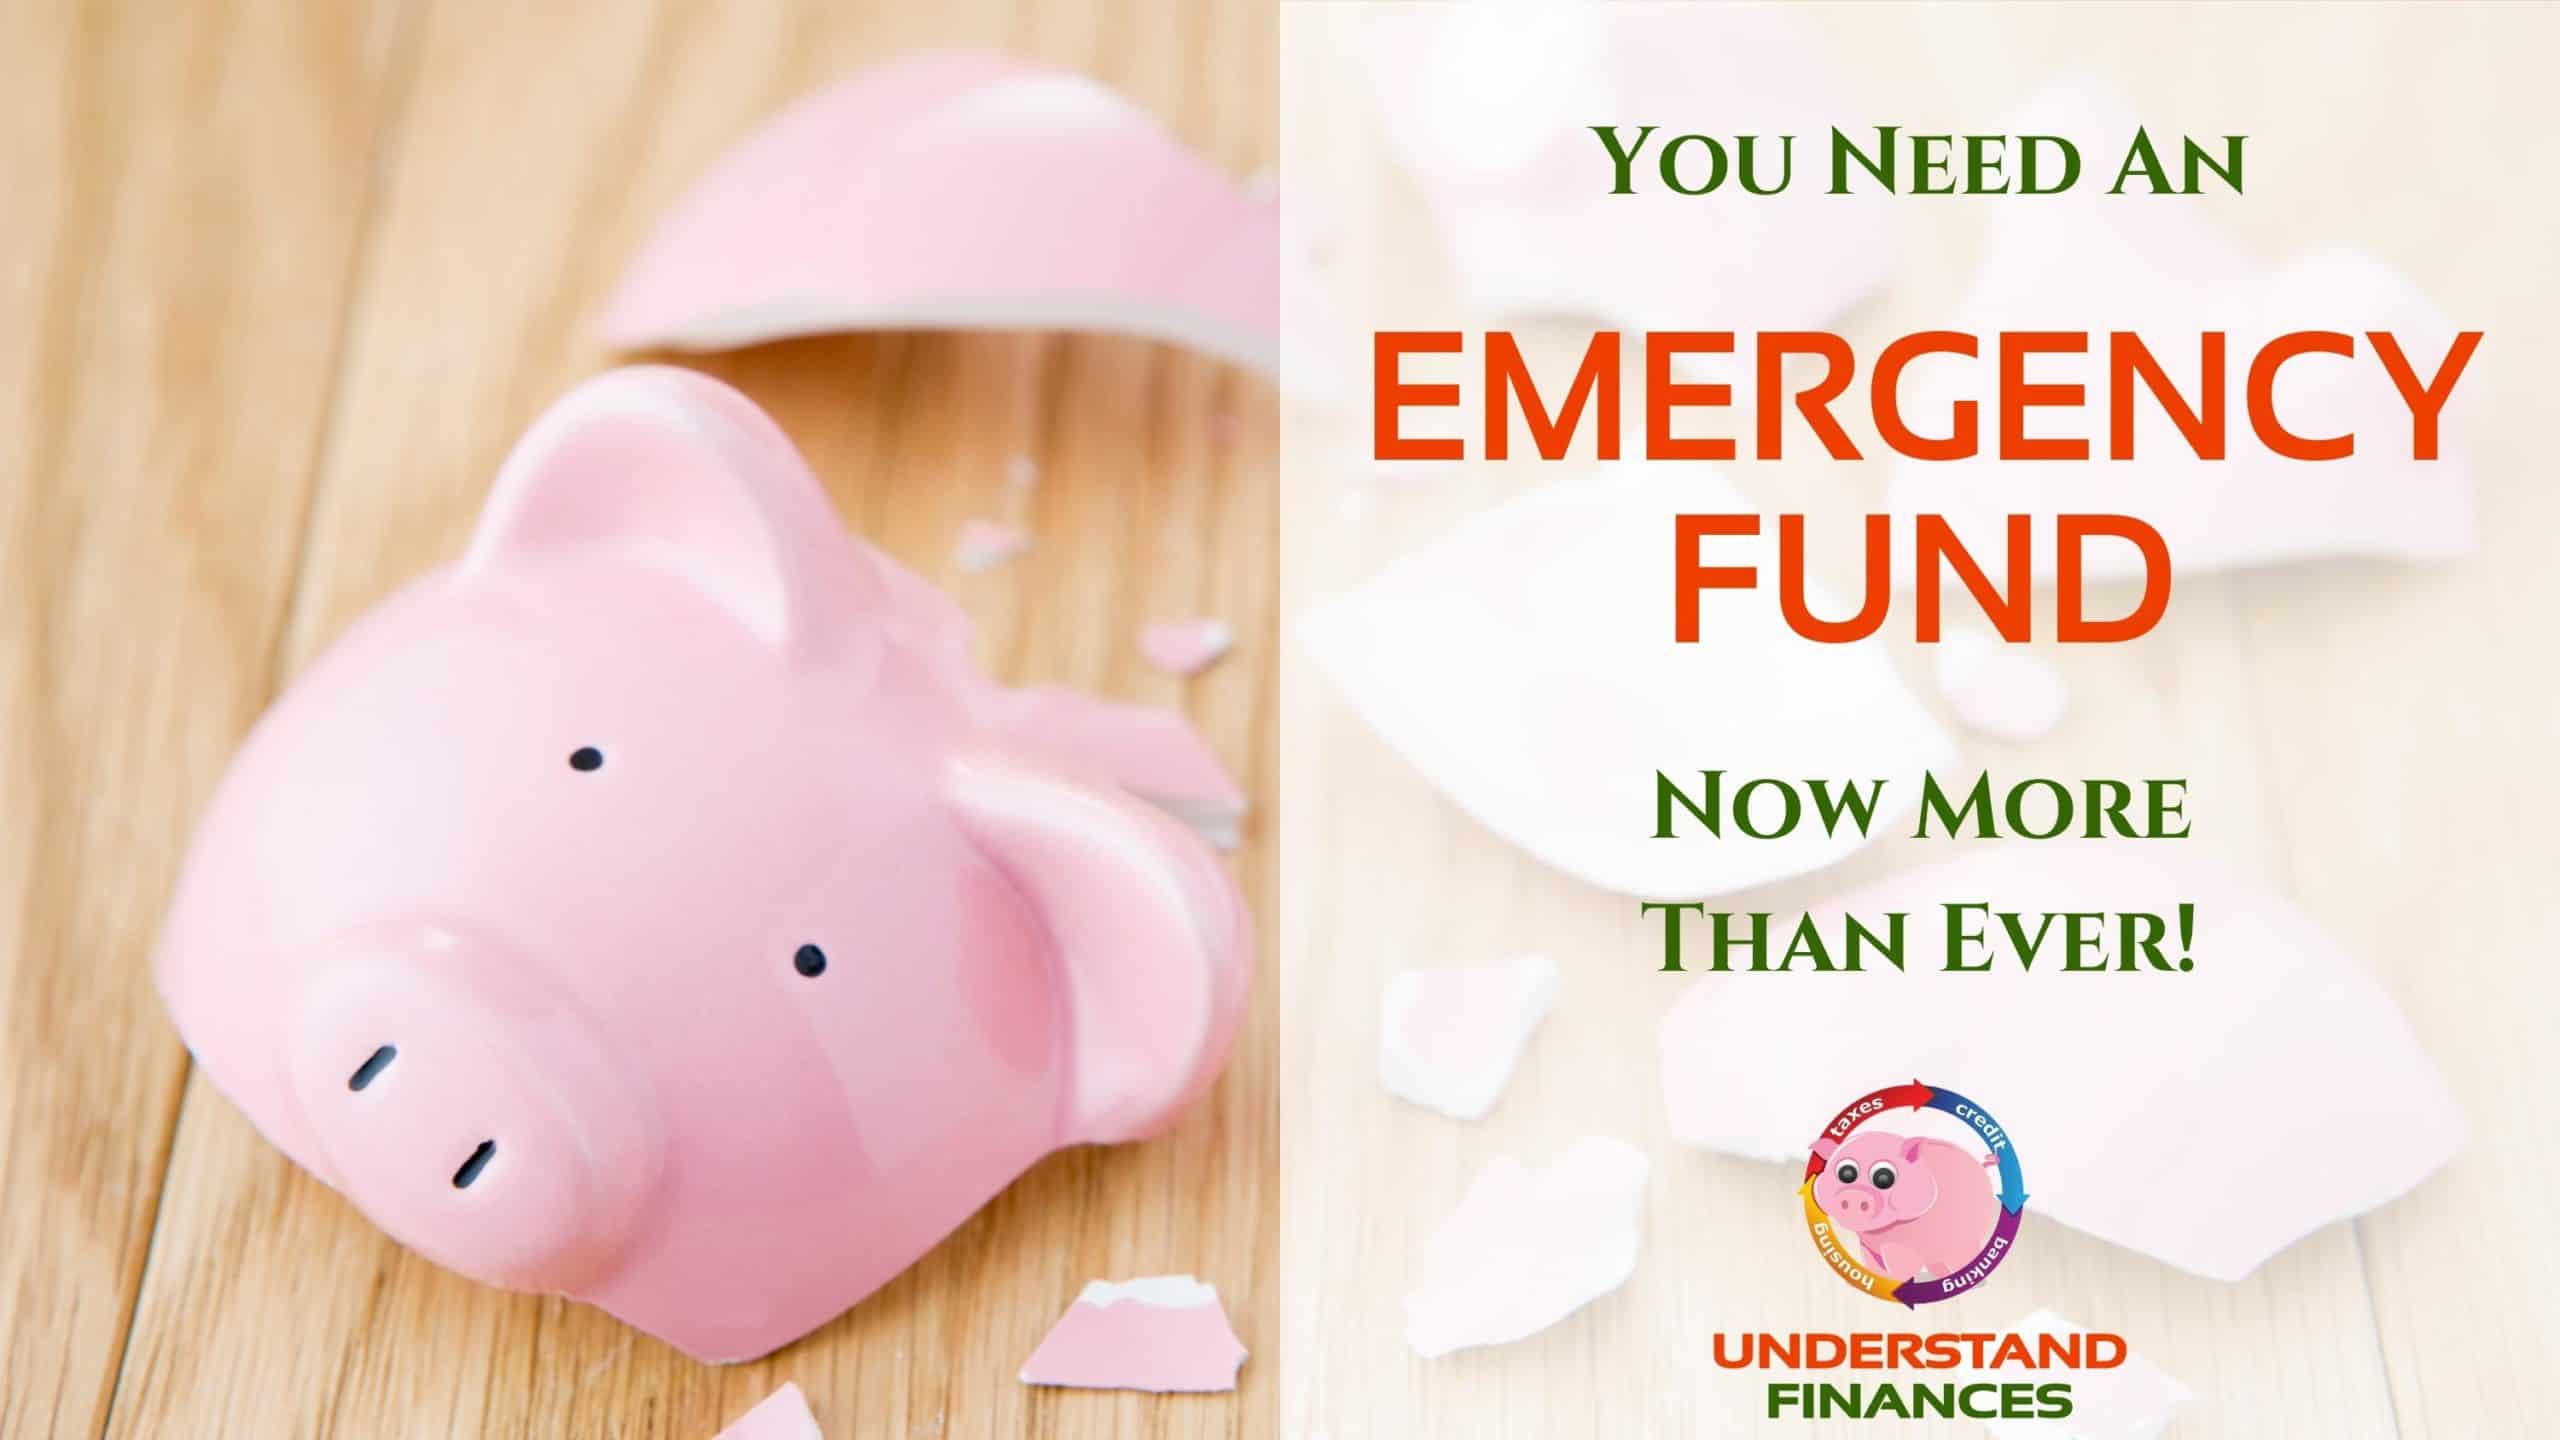 You Need An Emergency Fund Now More Than Ever